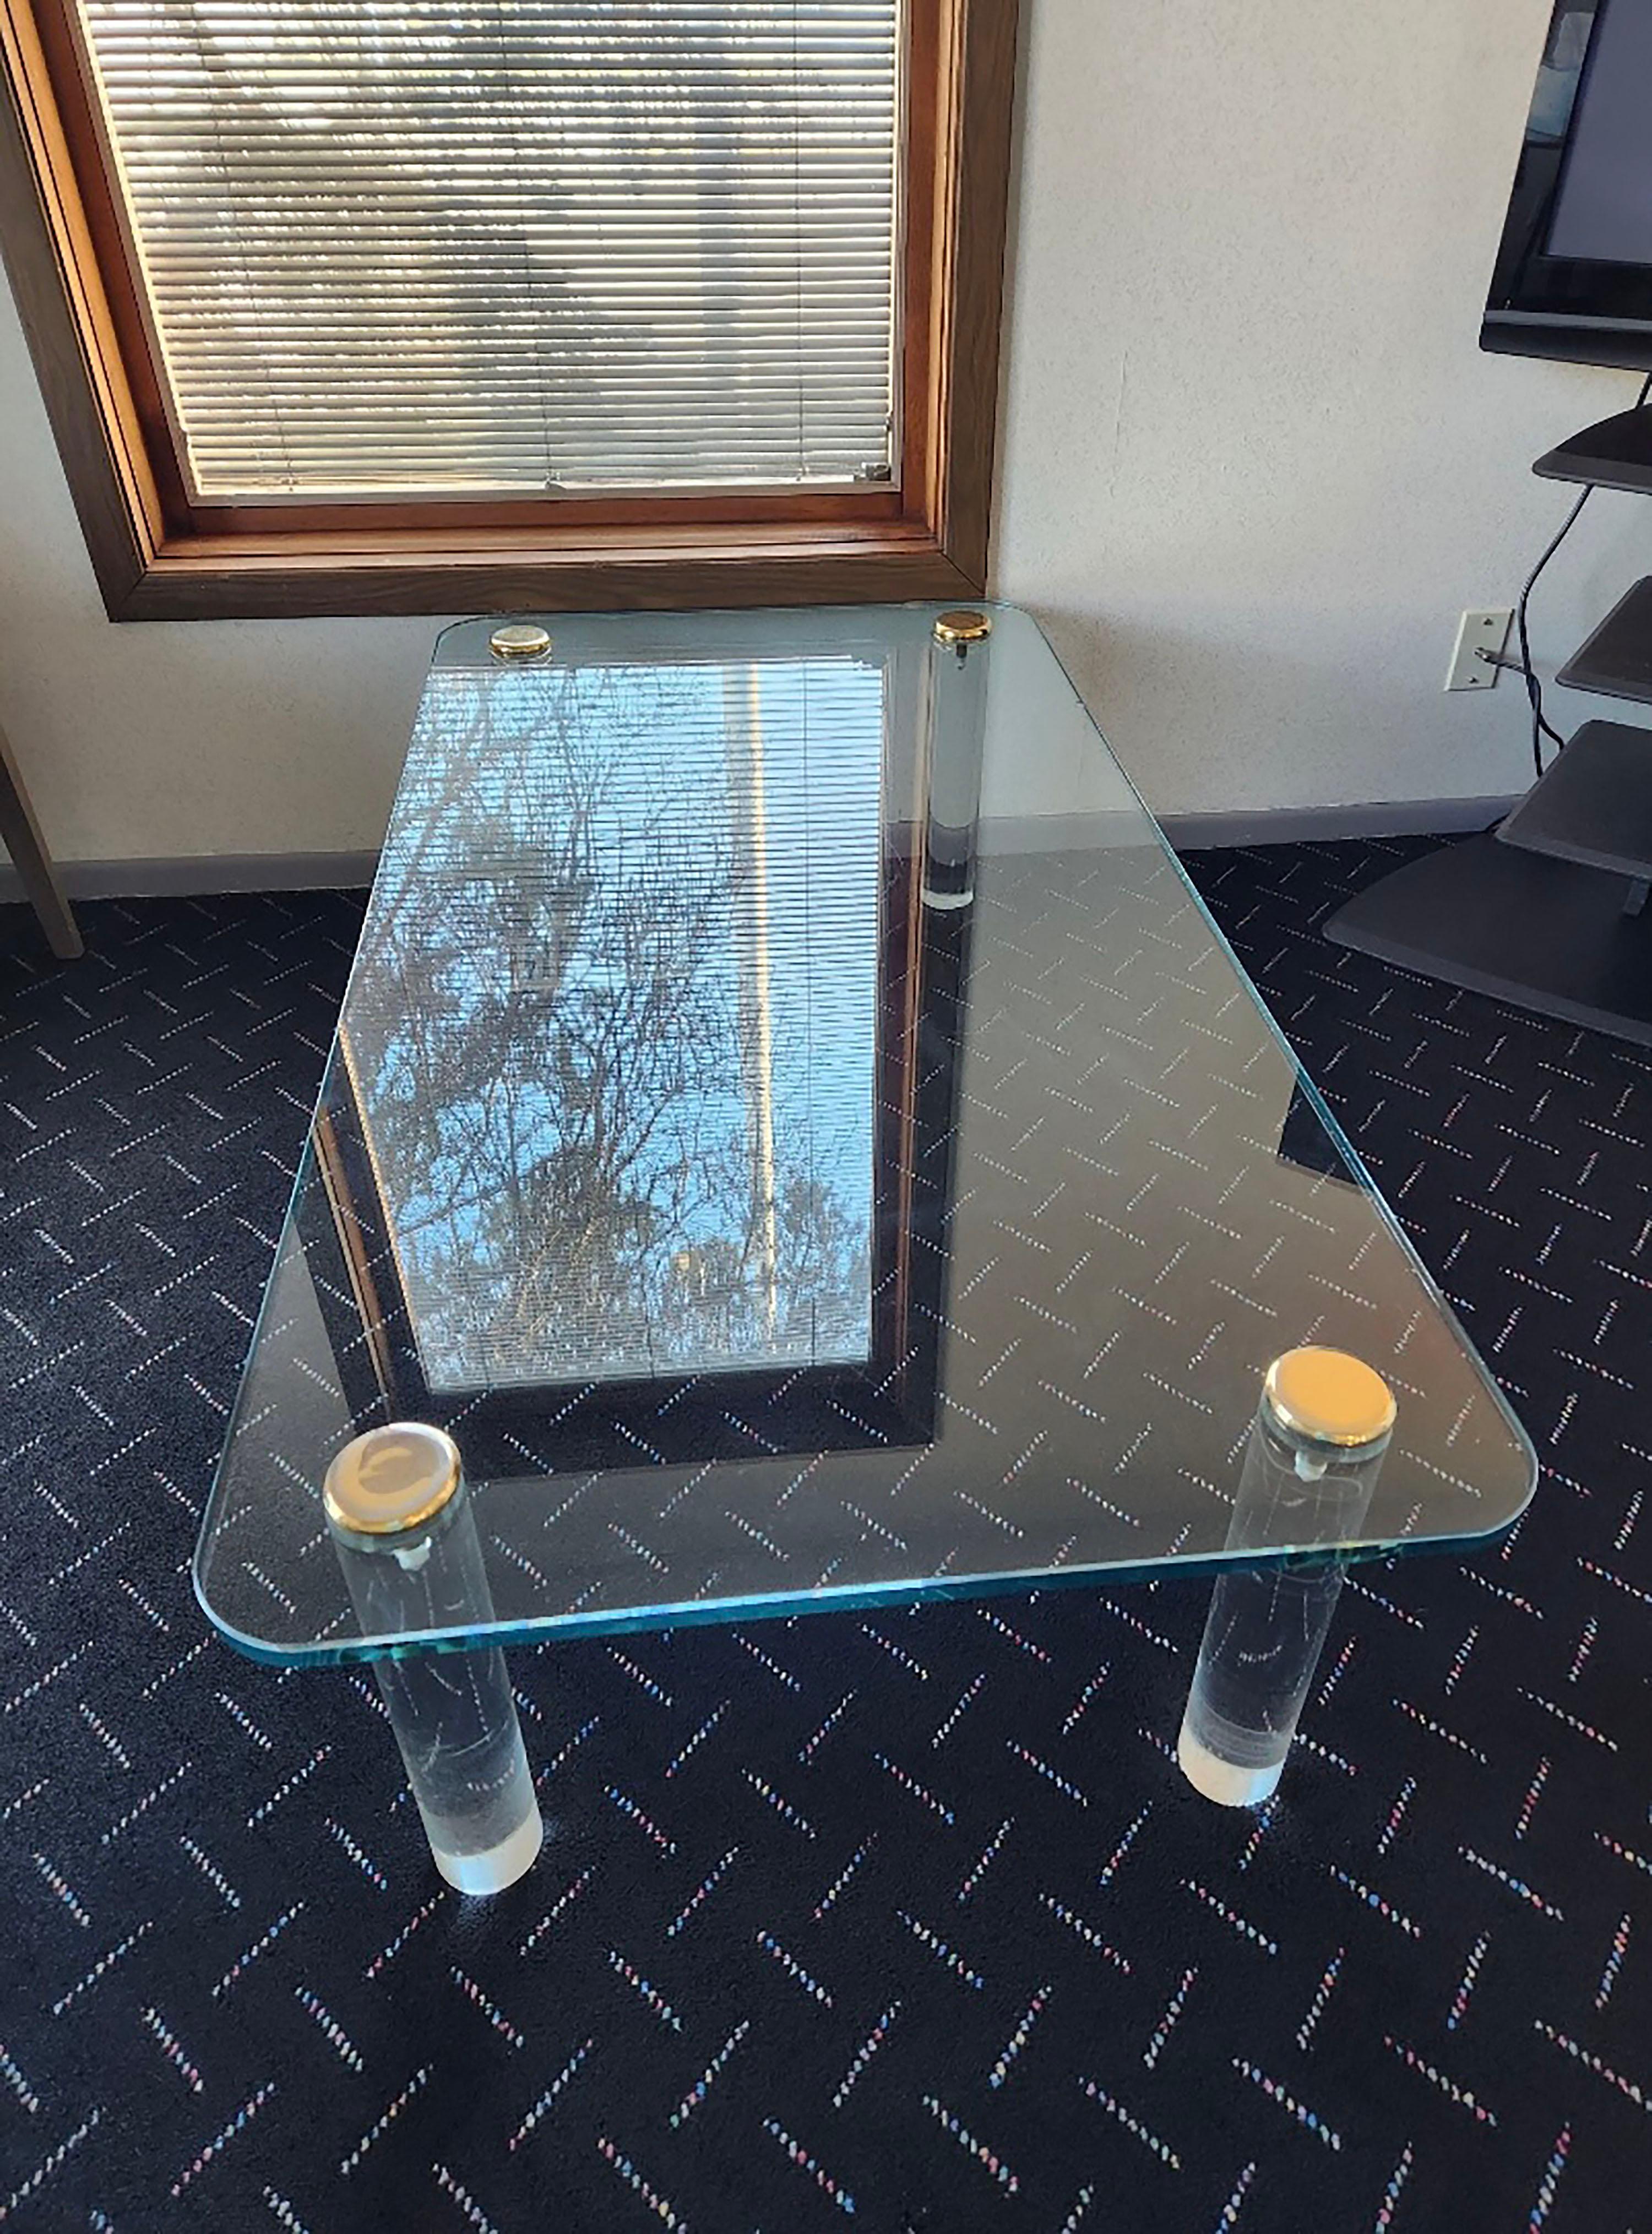 Vintage glass coffee table by Leon Rosen for Pace. Lucite Legs with Brass caps. All very high quality.

Glass has a notable shallow chip on underside of one edge. Shown circled in red. Could possibly be buffed out by a glass house. A new piece of